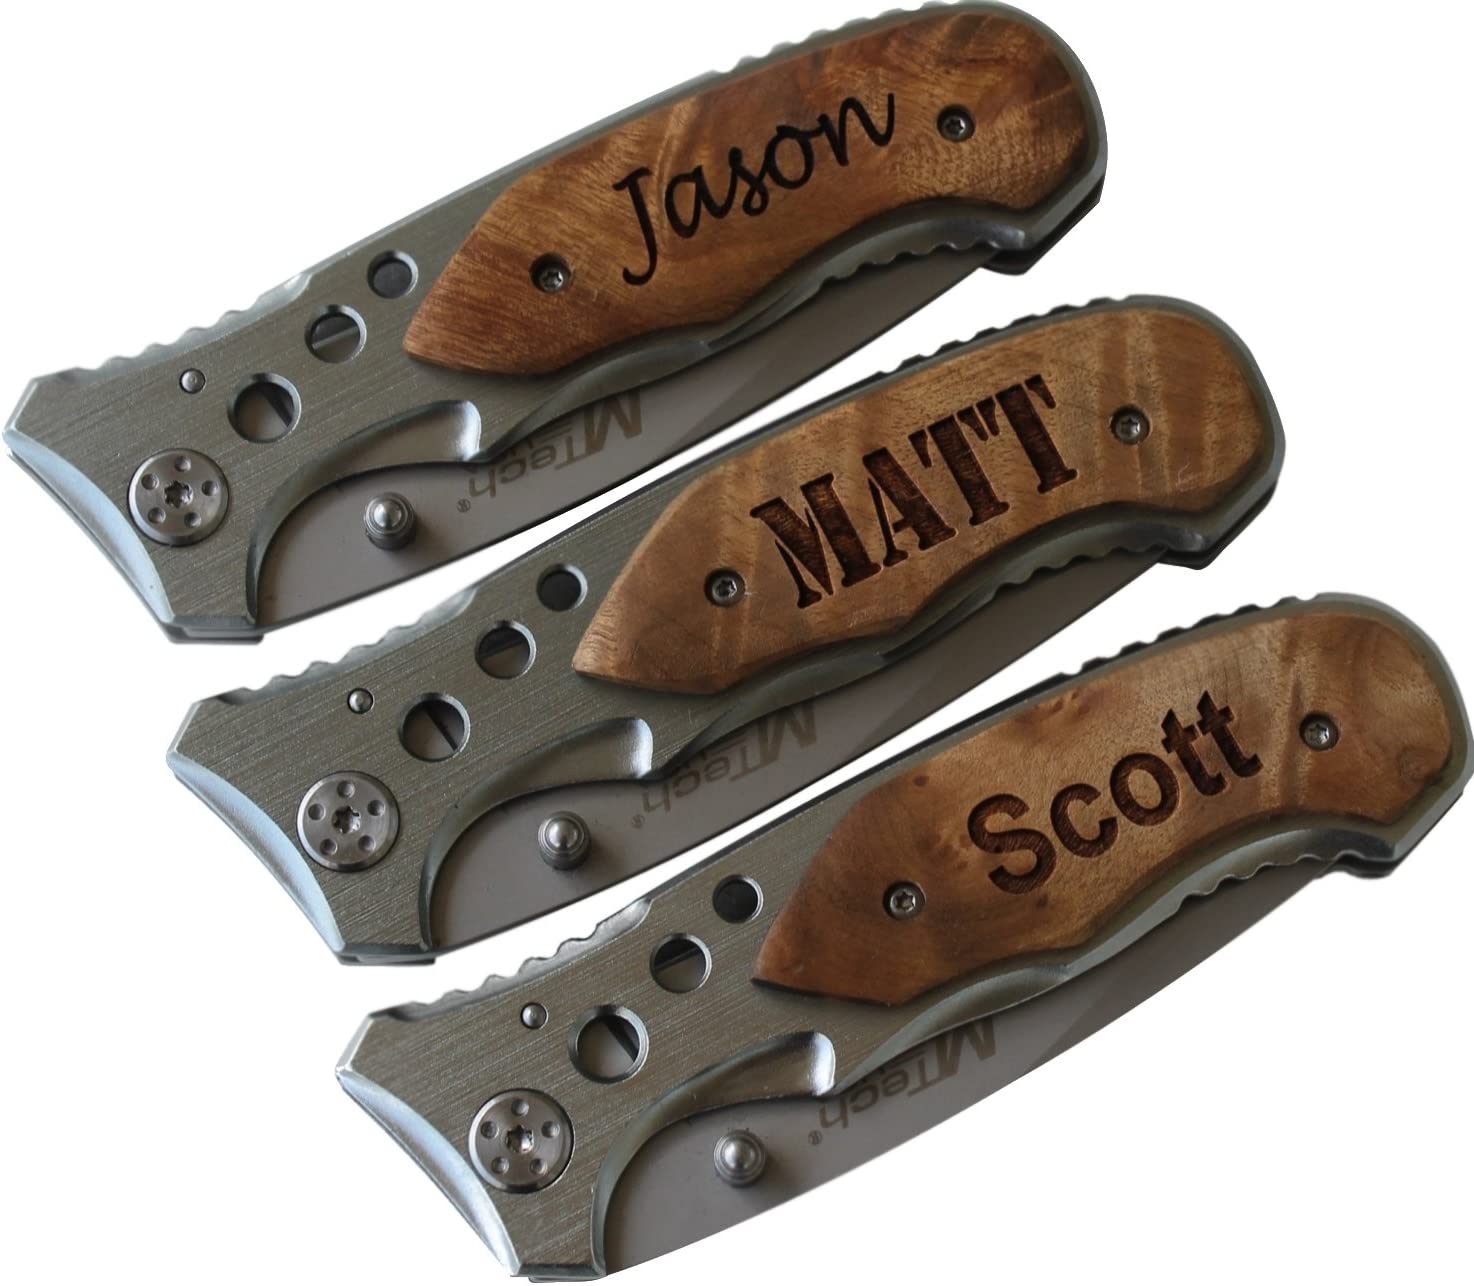 MTECH USA Free Engraving Personalized Laser Engraved Tactical Pocket Knife